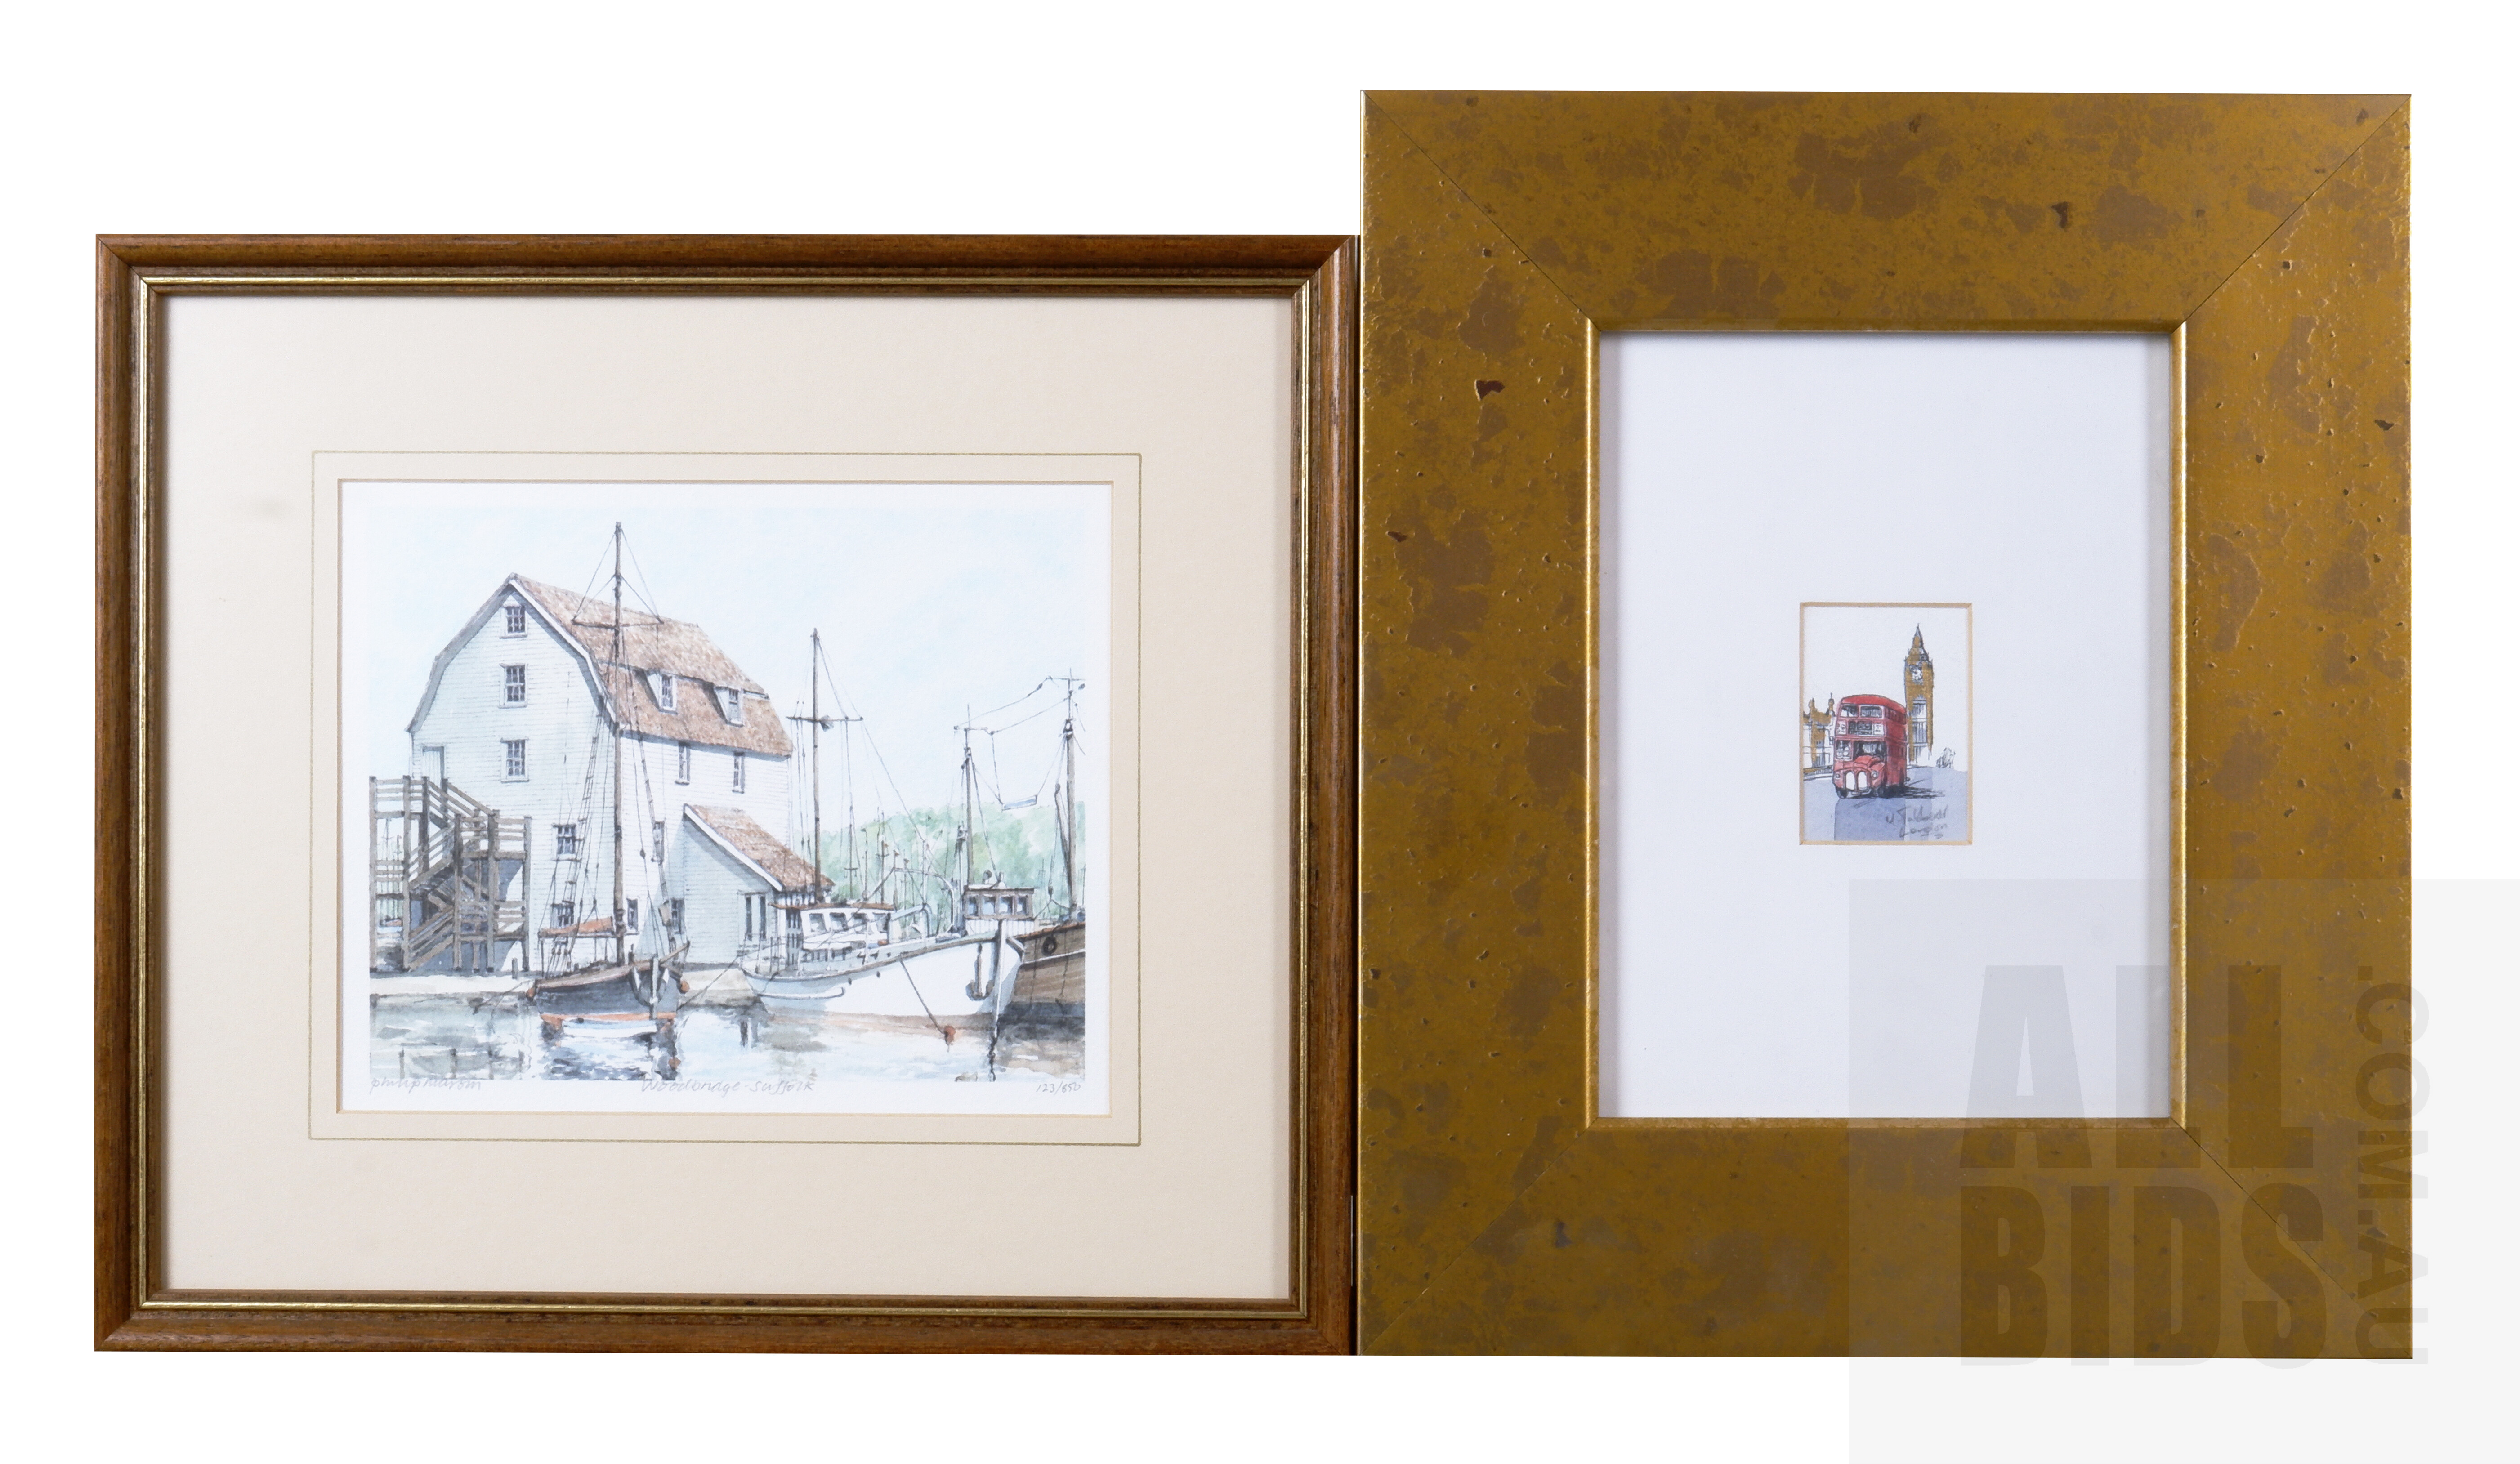 'Philip Marom (20th Century, British), Woodbridge, Suffolk, Lithograph, 14 x 17 cm (image size), together with a small framed etching of a London bus (signed indistinctly)'